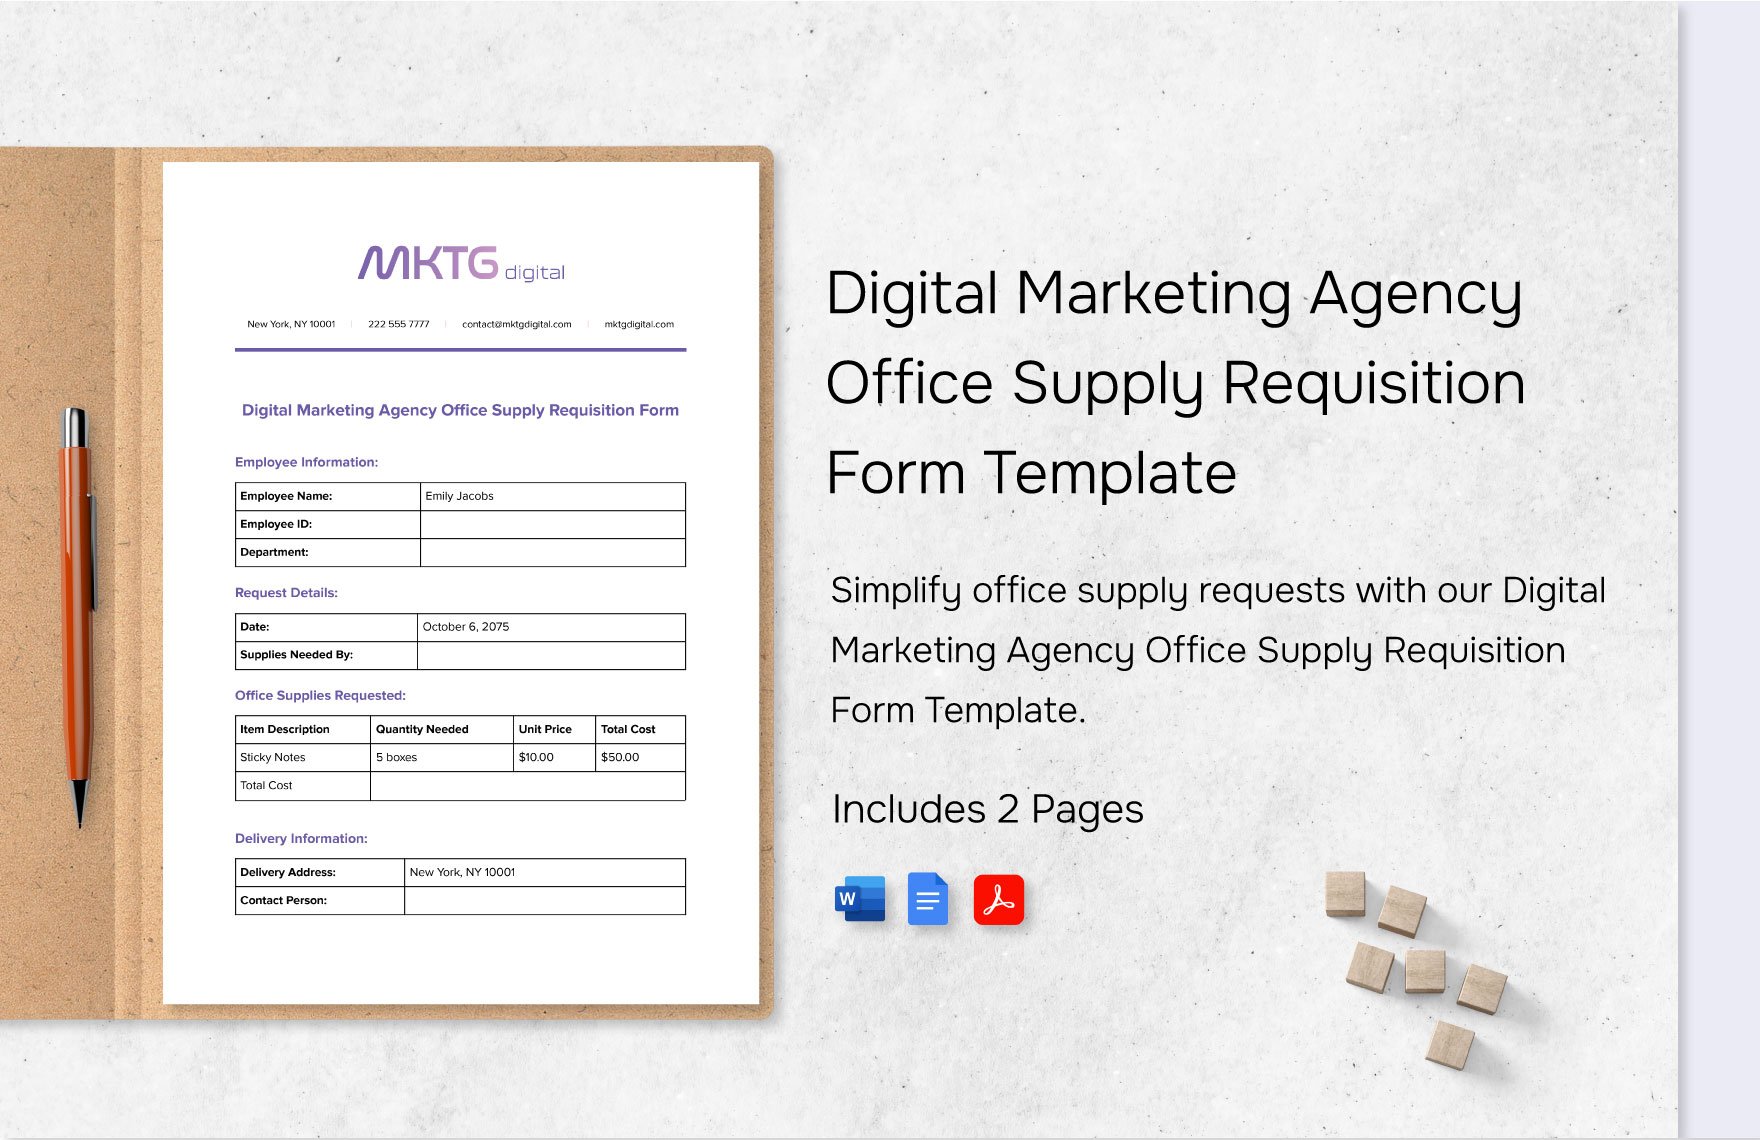 Digital Marketing Agency Office Supply Requisition Form Template in Word, Google Docs, PDF